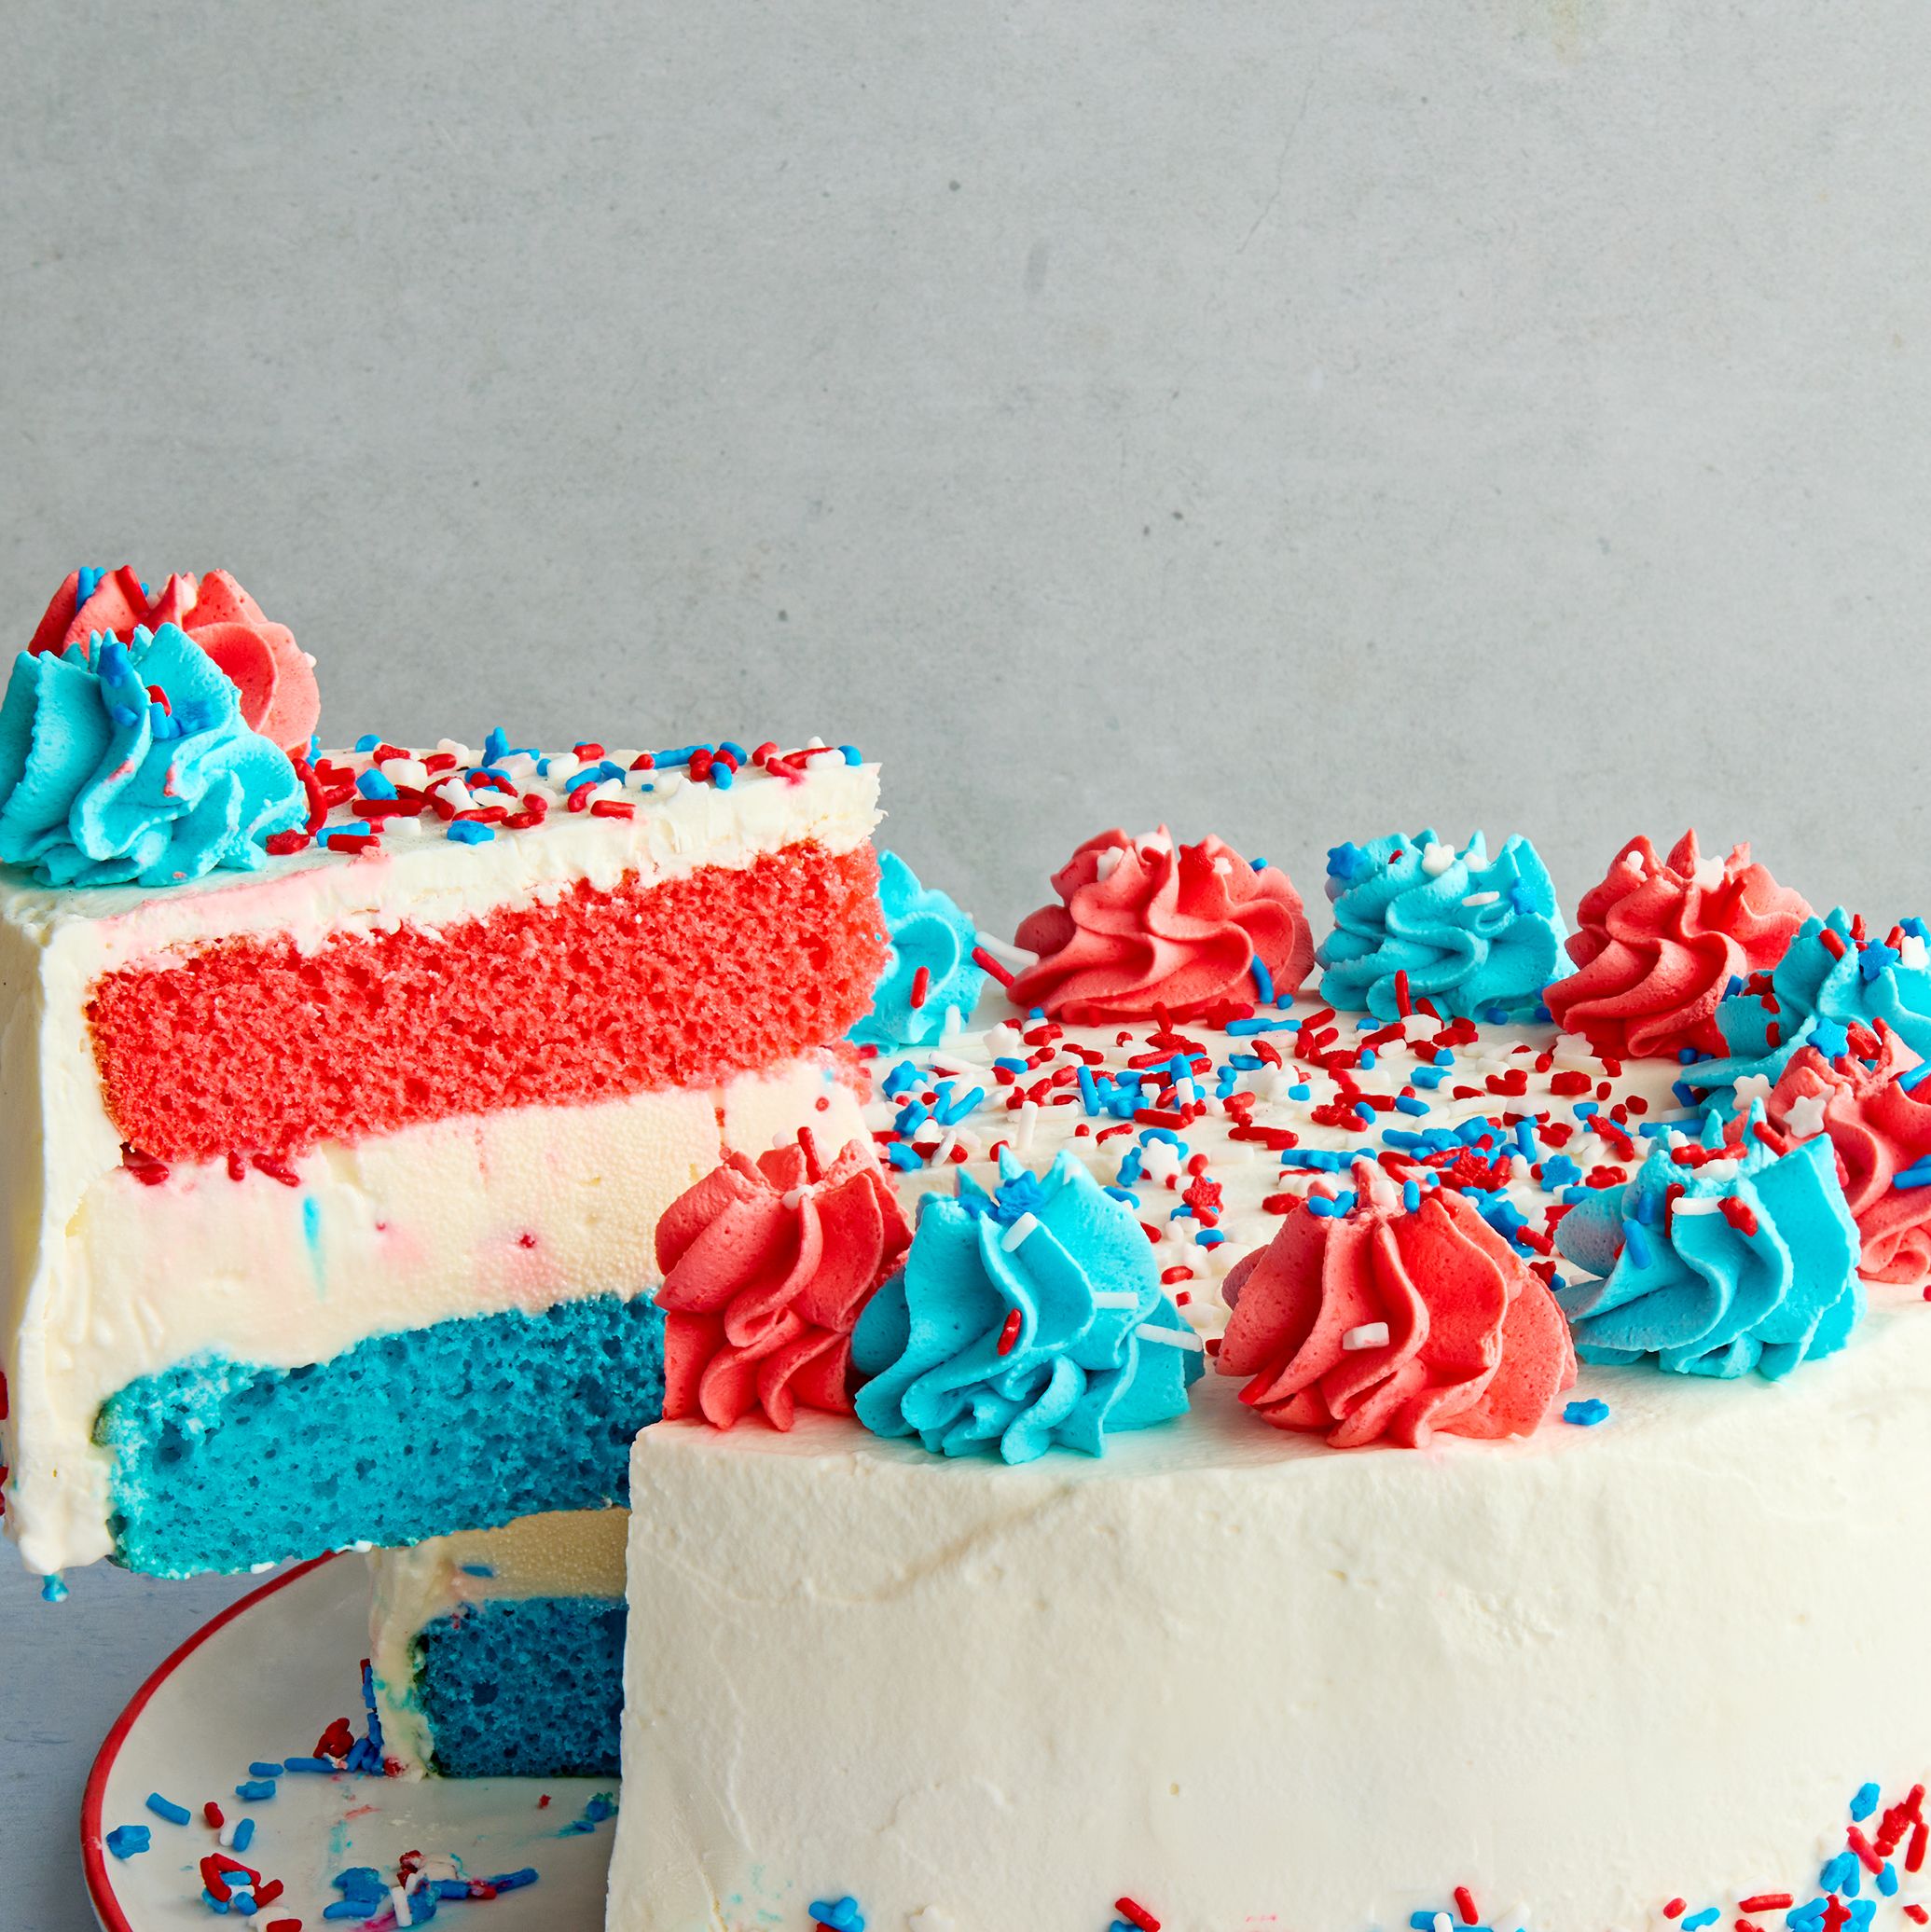 These 50 Red, White & Blue Desserts Will Get More Attention Than The Fireworks